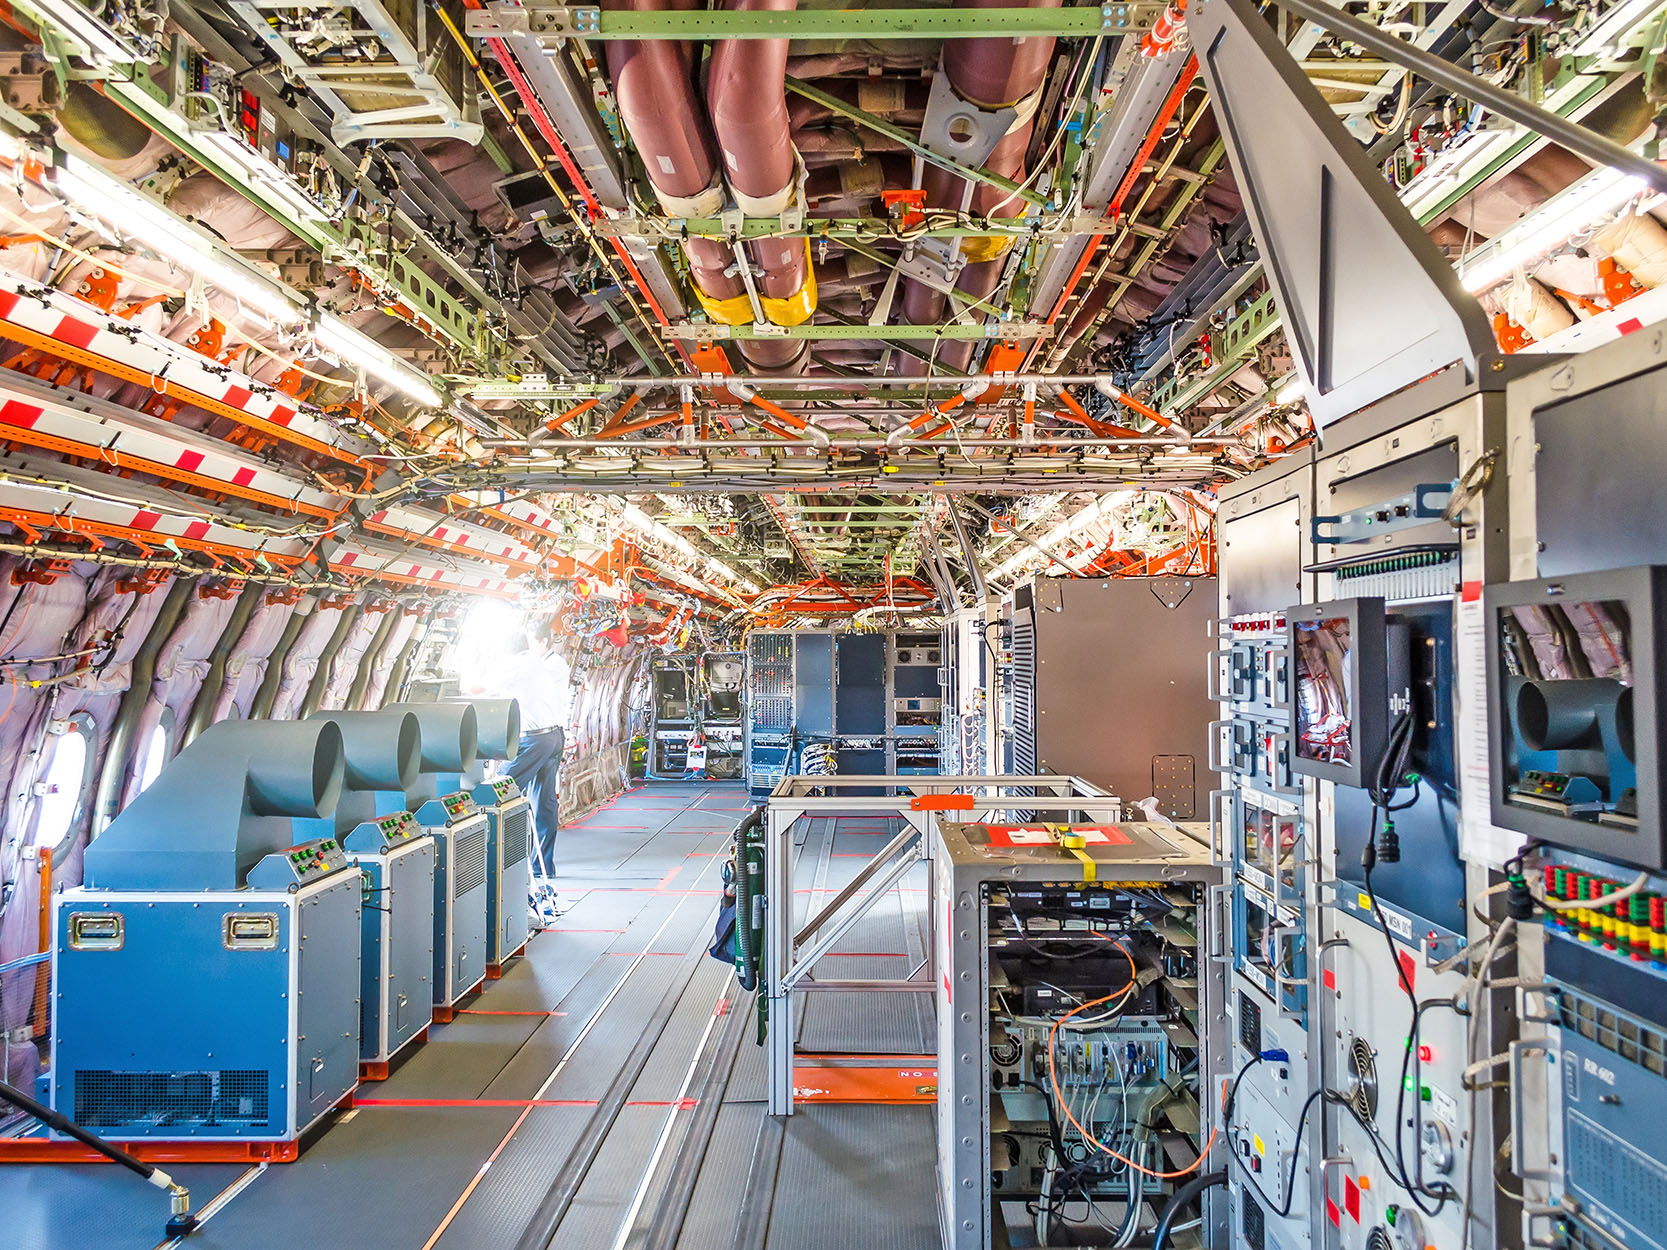 Interior of aircraft during manufacturing